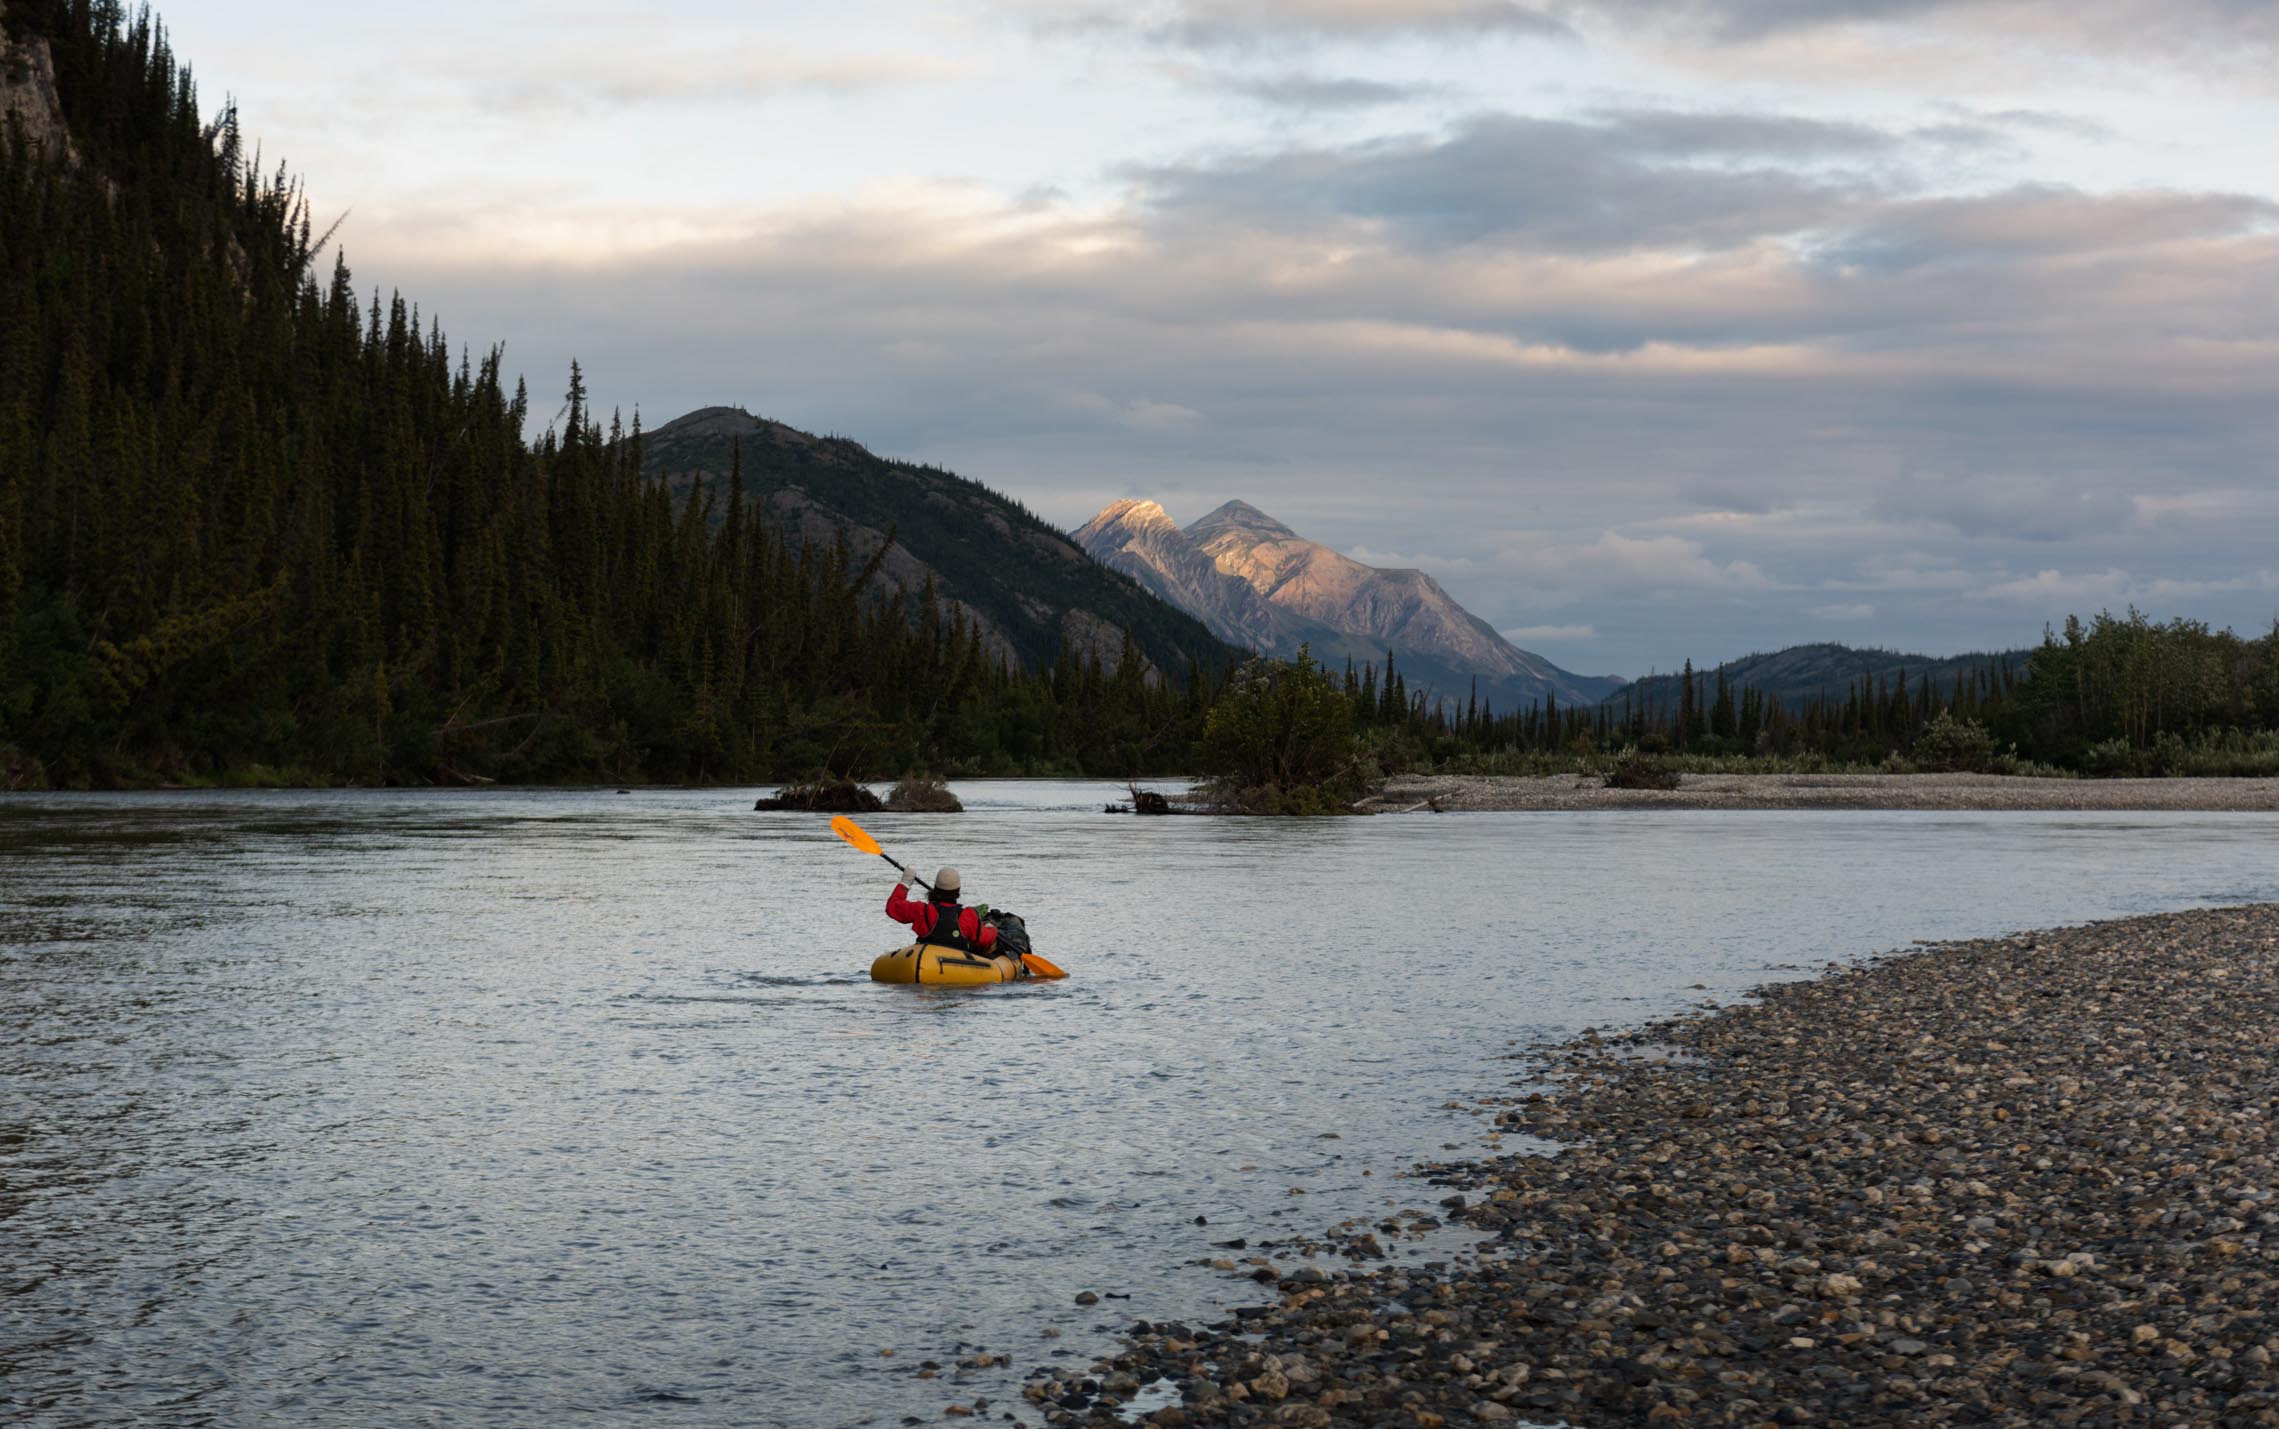 Packrafting in a lake at dawn with a snow capped mountain in the background